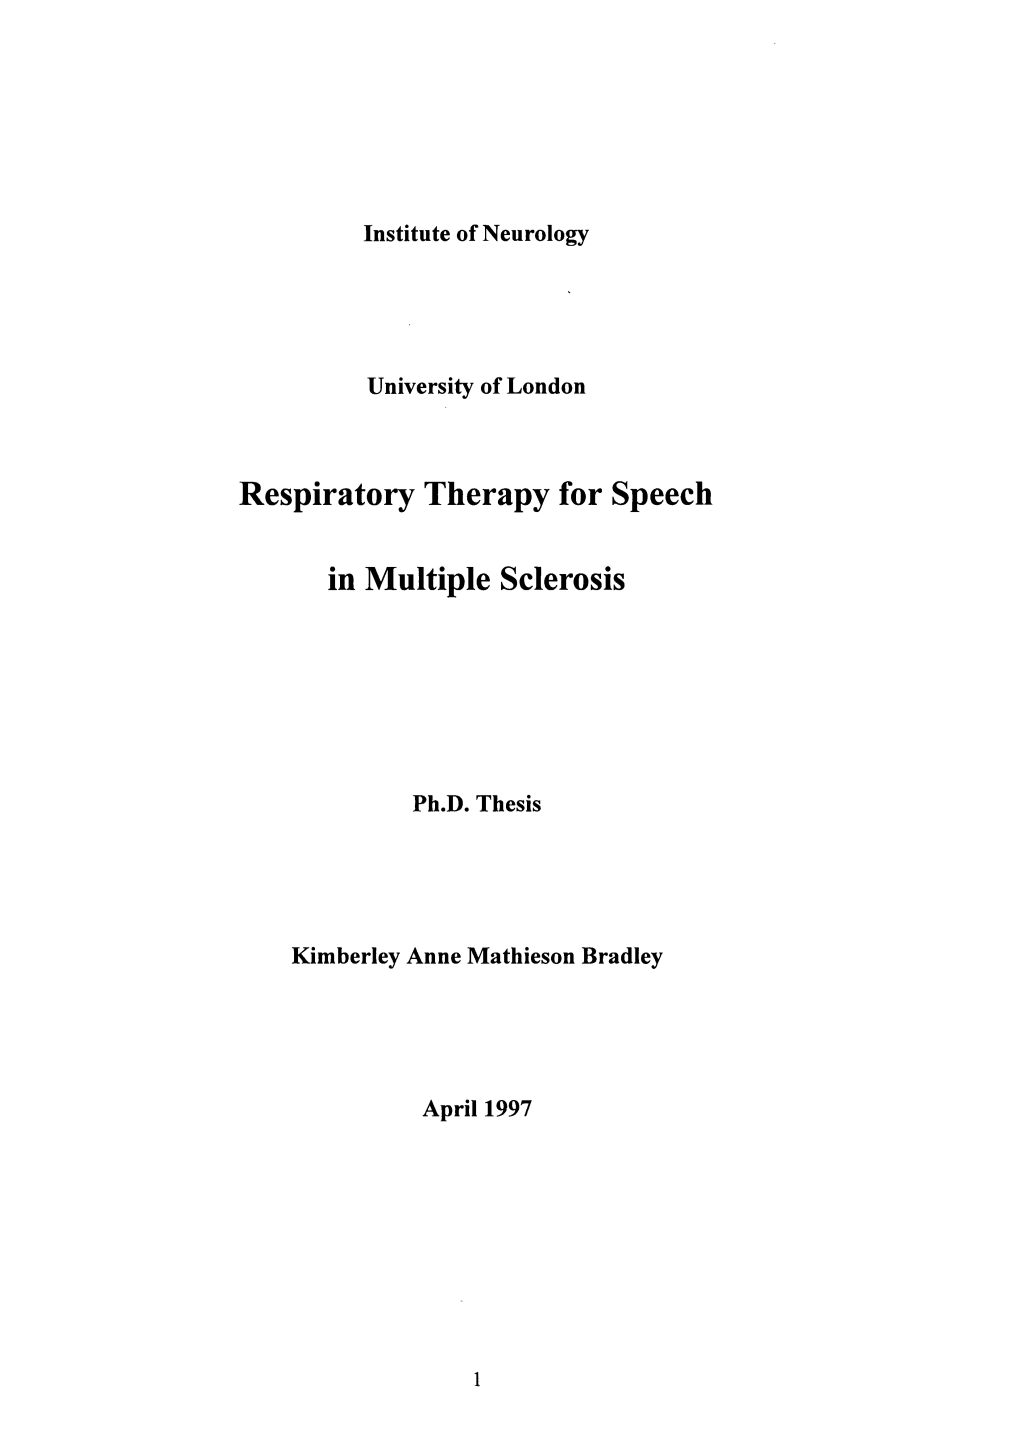 Respiratory Therapy for Speech in Multiple Sclerosis